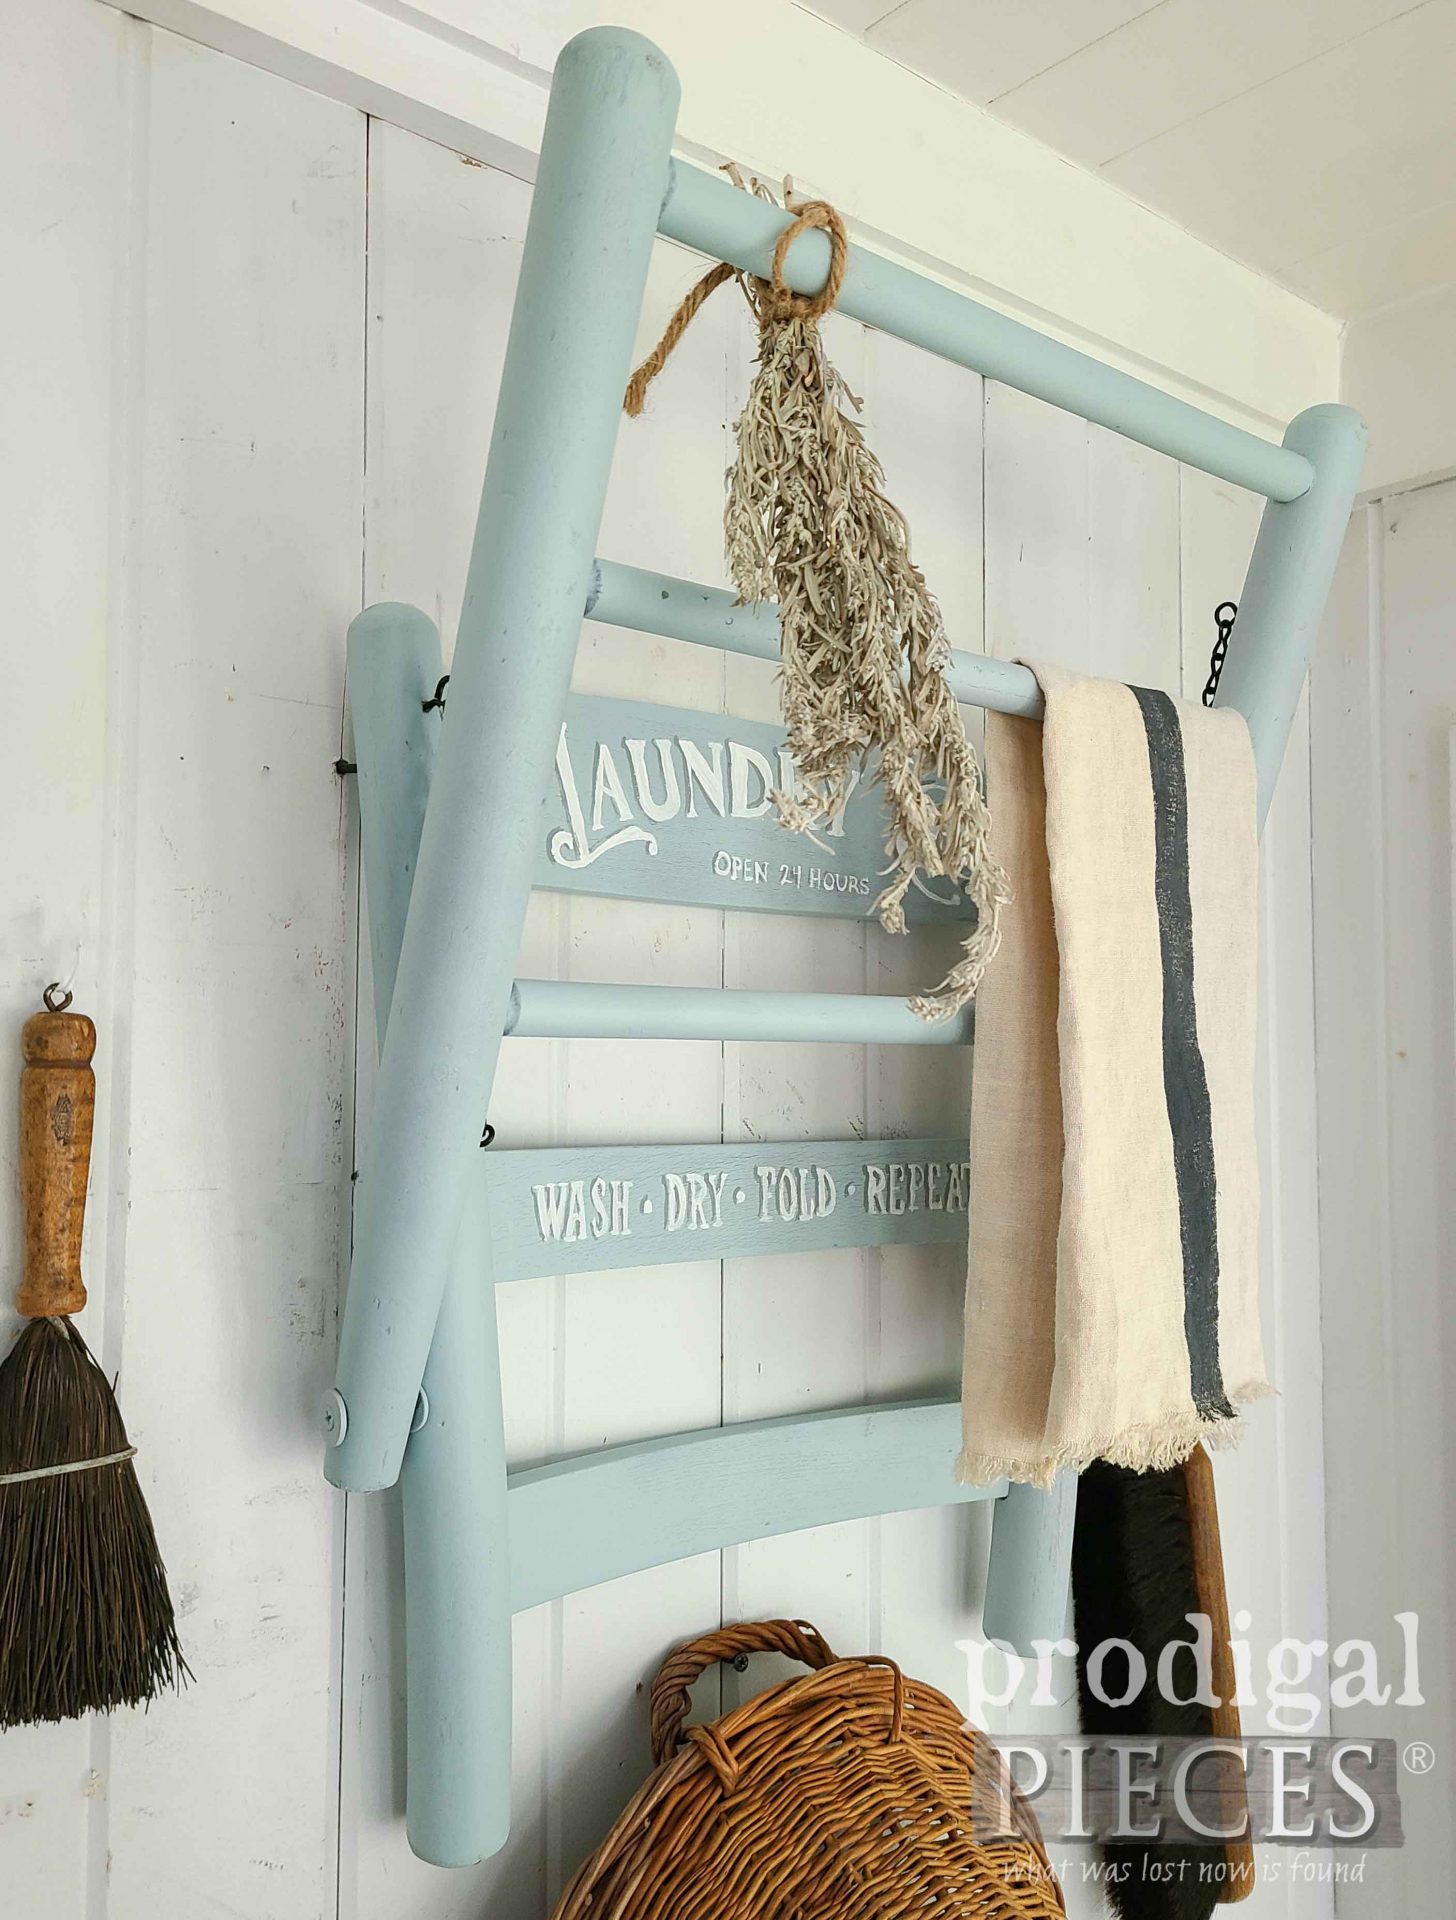 DIY Folding Drying Rack Upcycled from a Vintage Caned Chair by Larissa of Prodigal Pieces | prodigalpieces.com #prodigalpieces #vintage #upcycled #diy